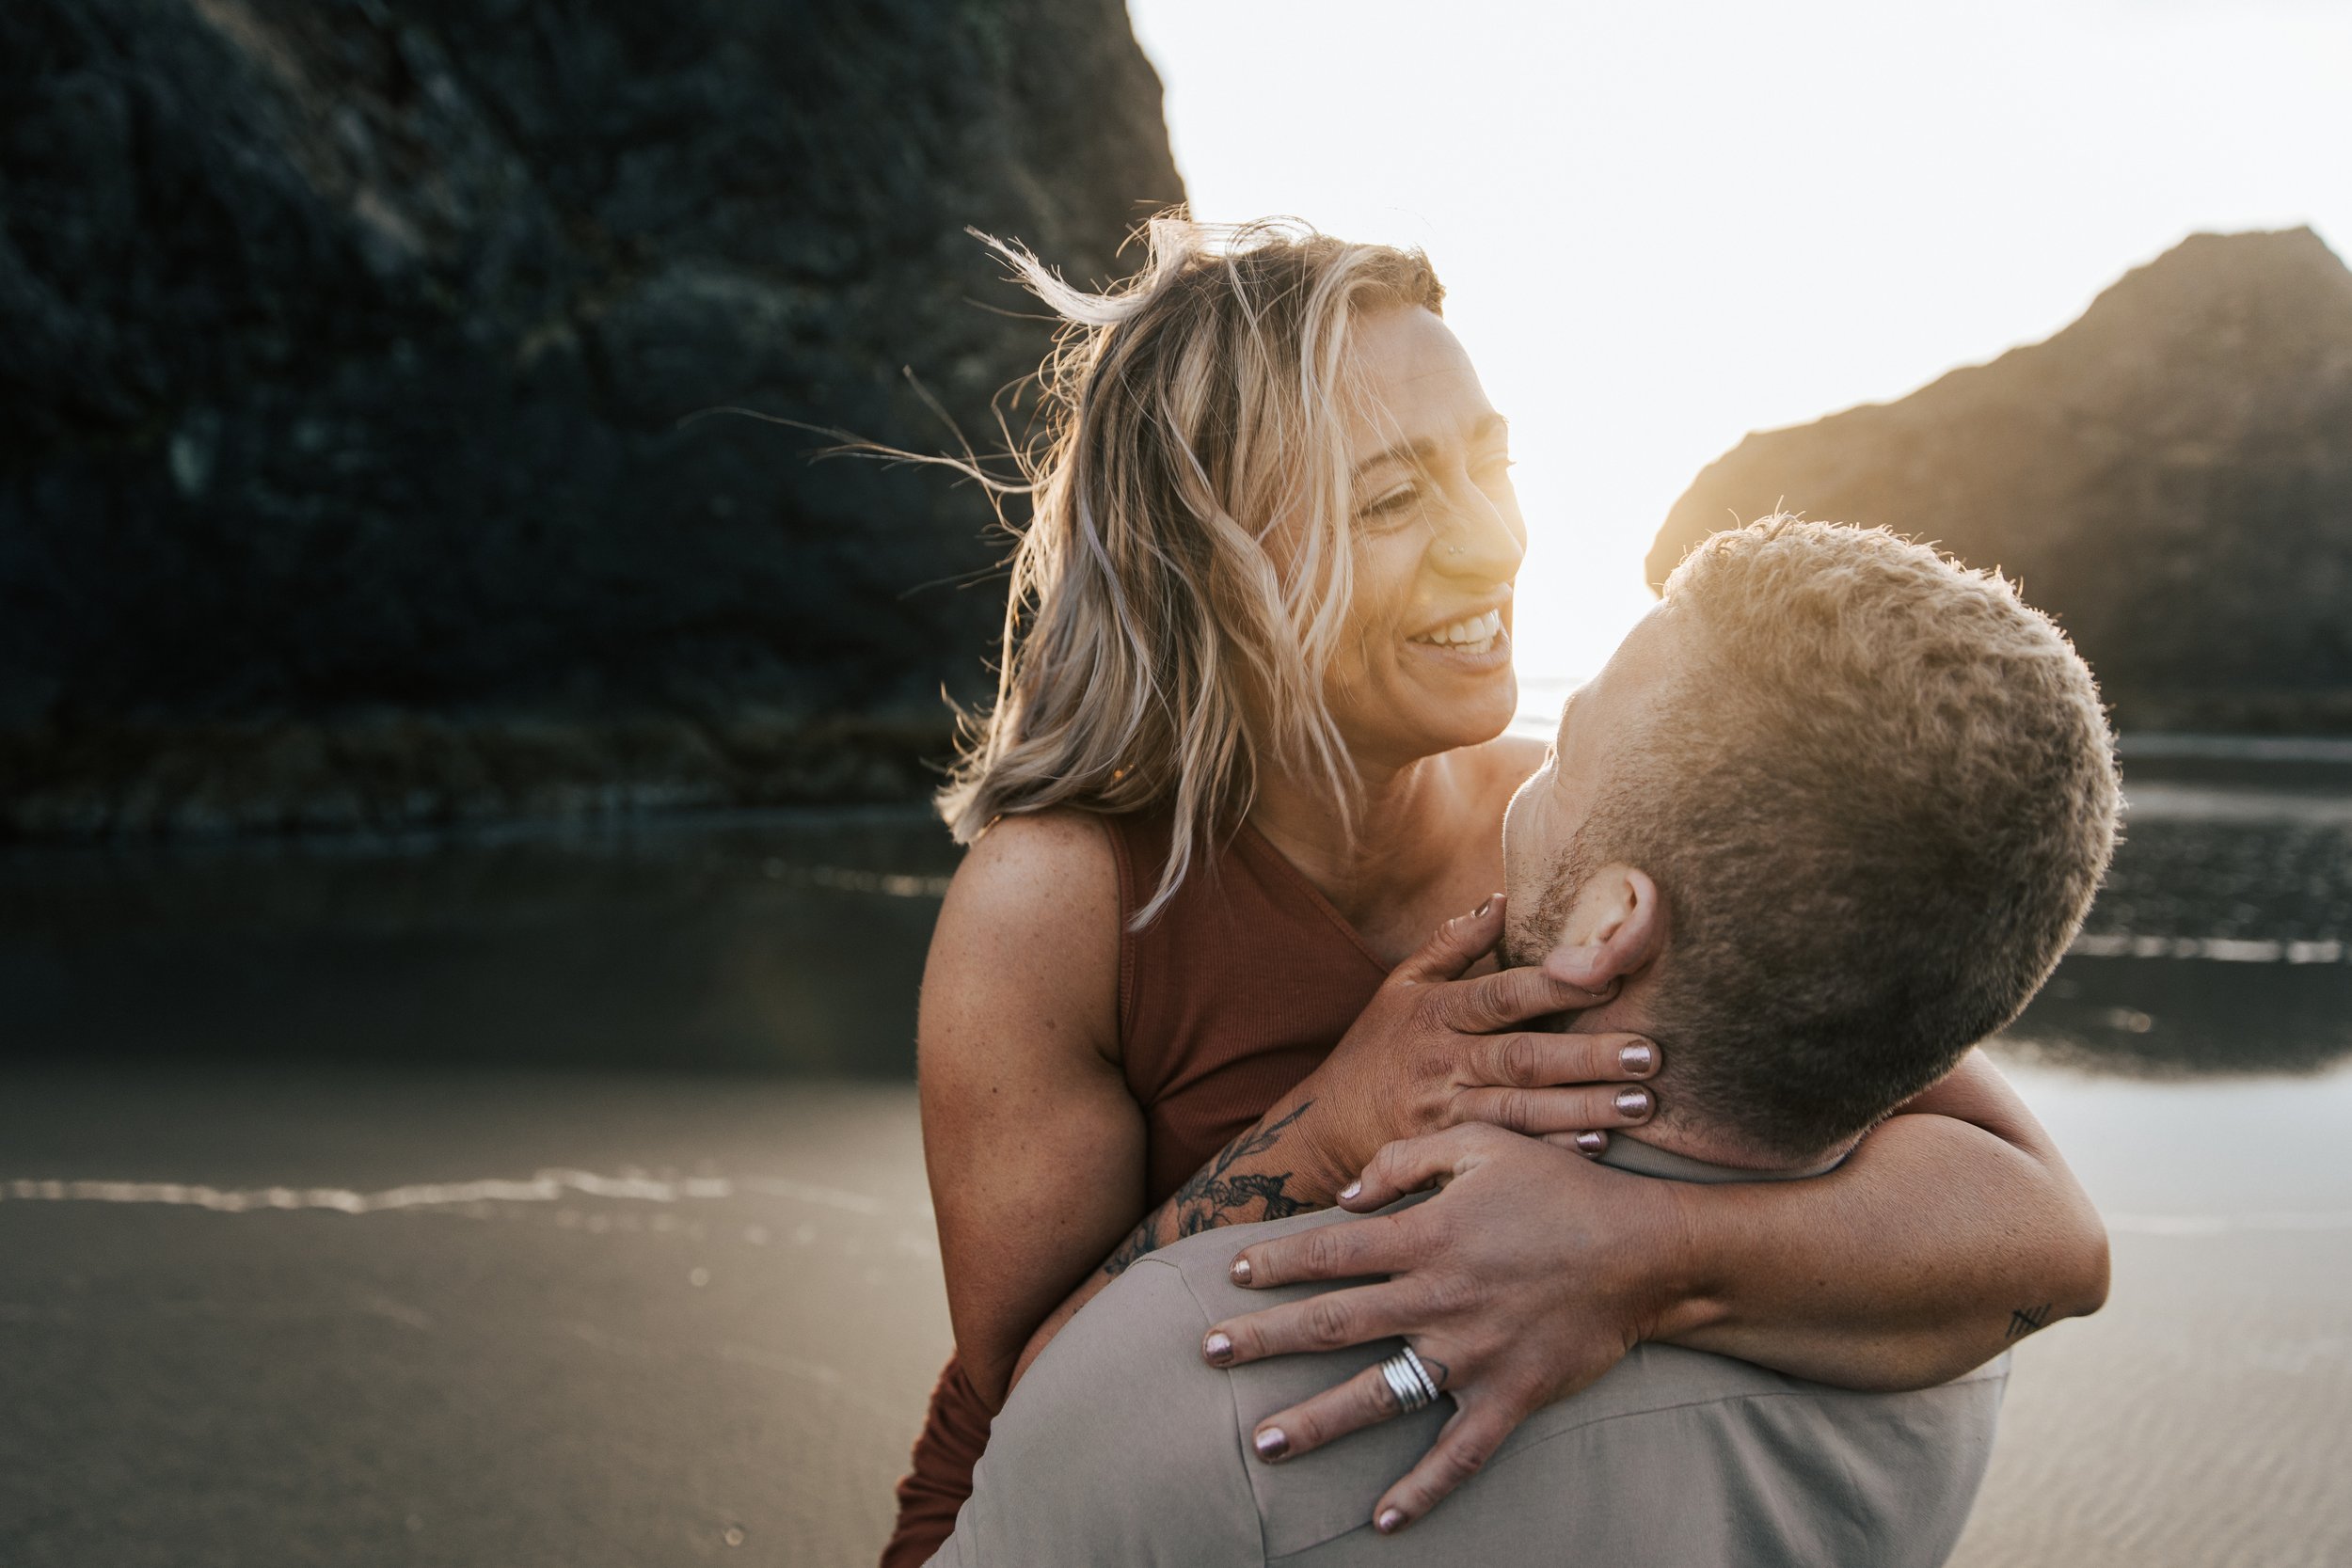  Oregon coast engagement session. Couples session in Southern Oregon. Couple playing on the beach with the sunset behind them at golden hour. Man and woman cuddle up together as the sun sets behind them between the huge rocks on the beach.   